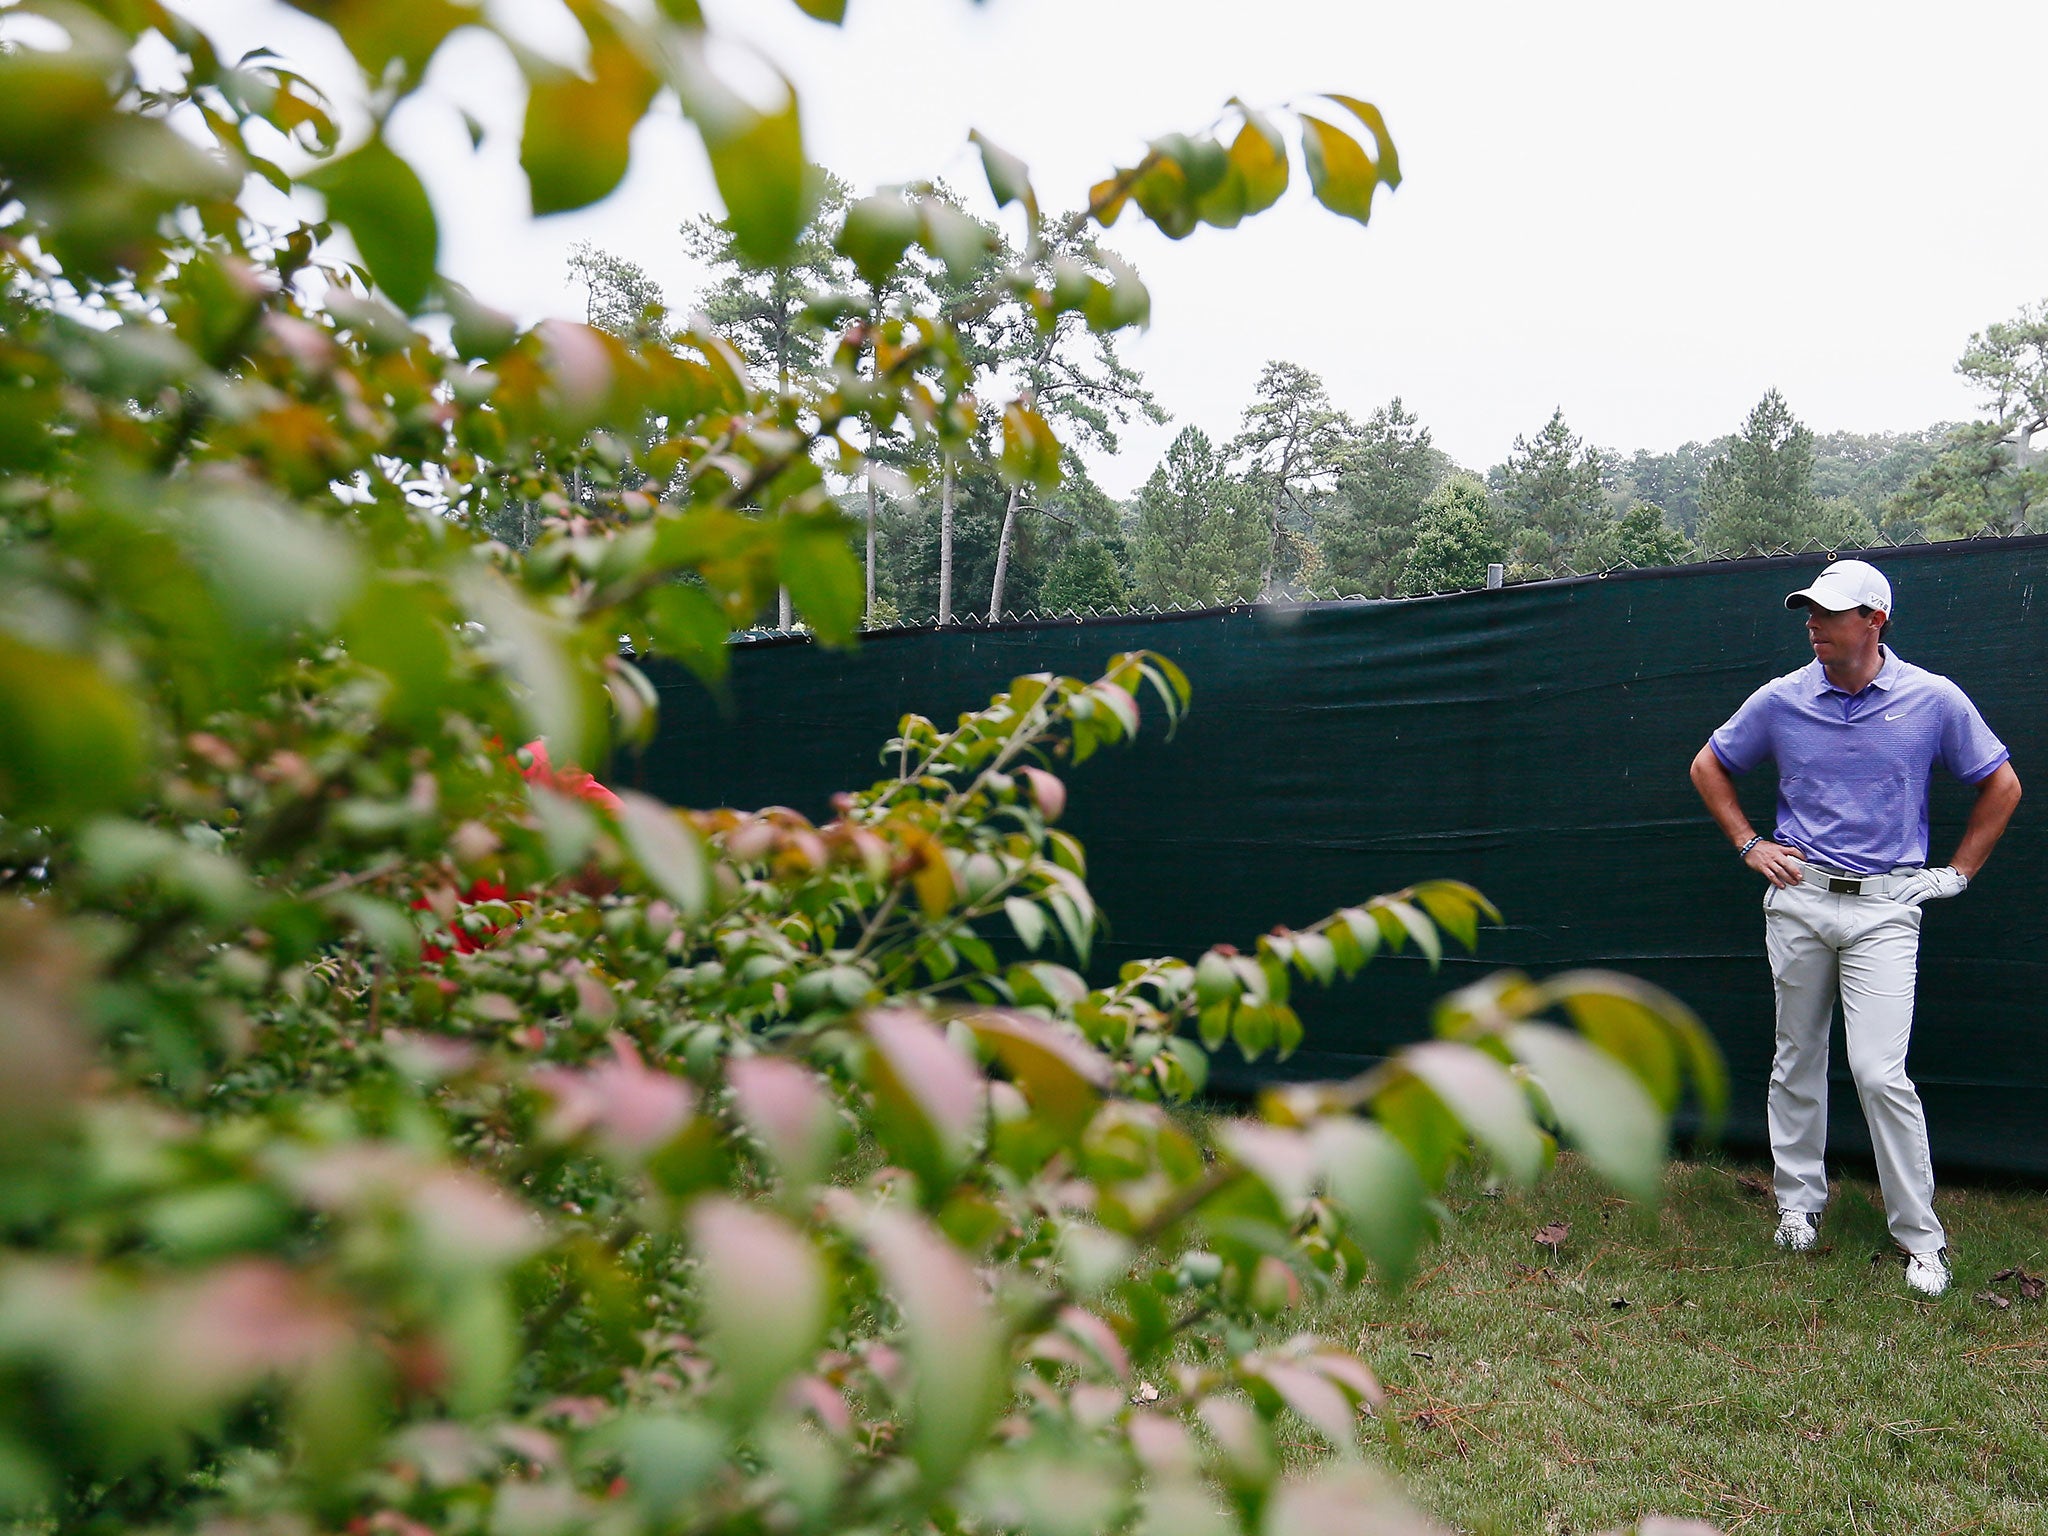 Rory McIlroy searches for his ball after hitting a wayward drive during the final round of the Tour Championship